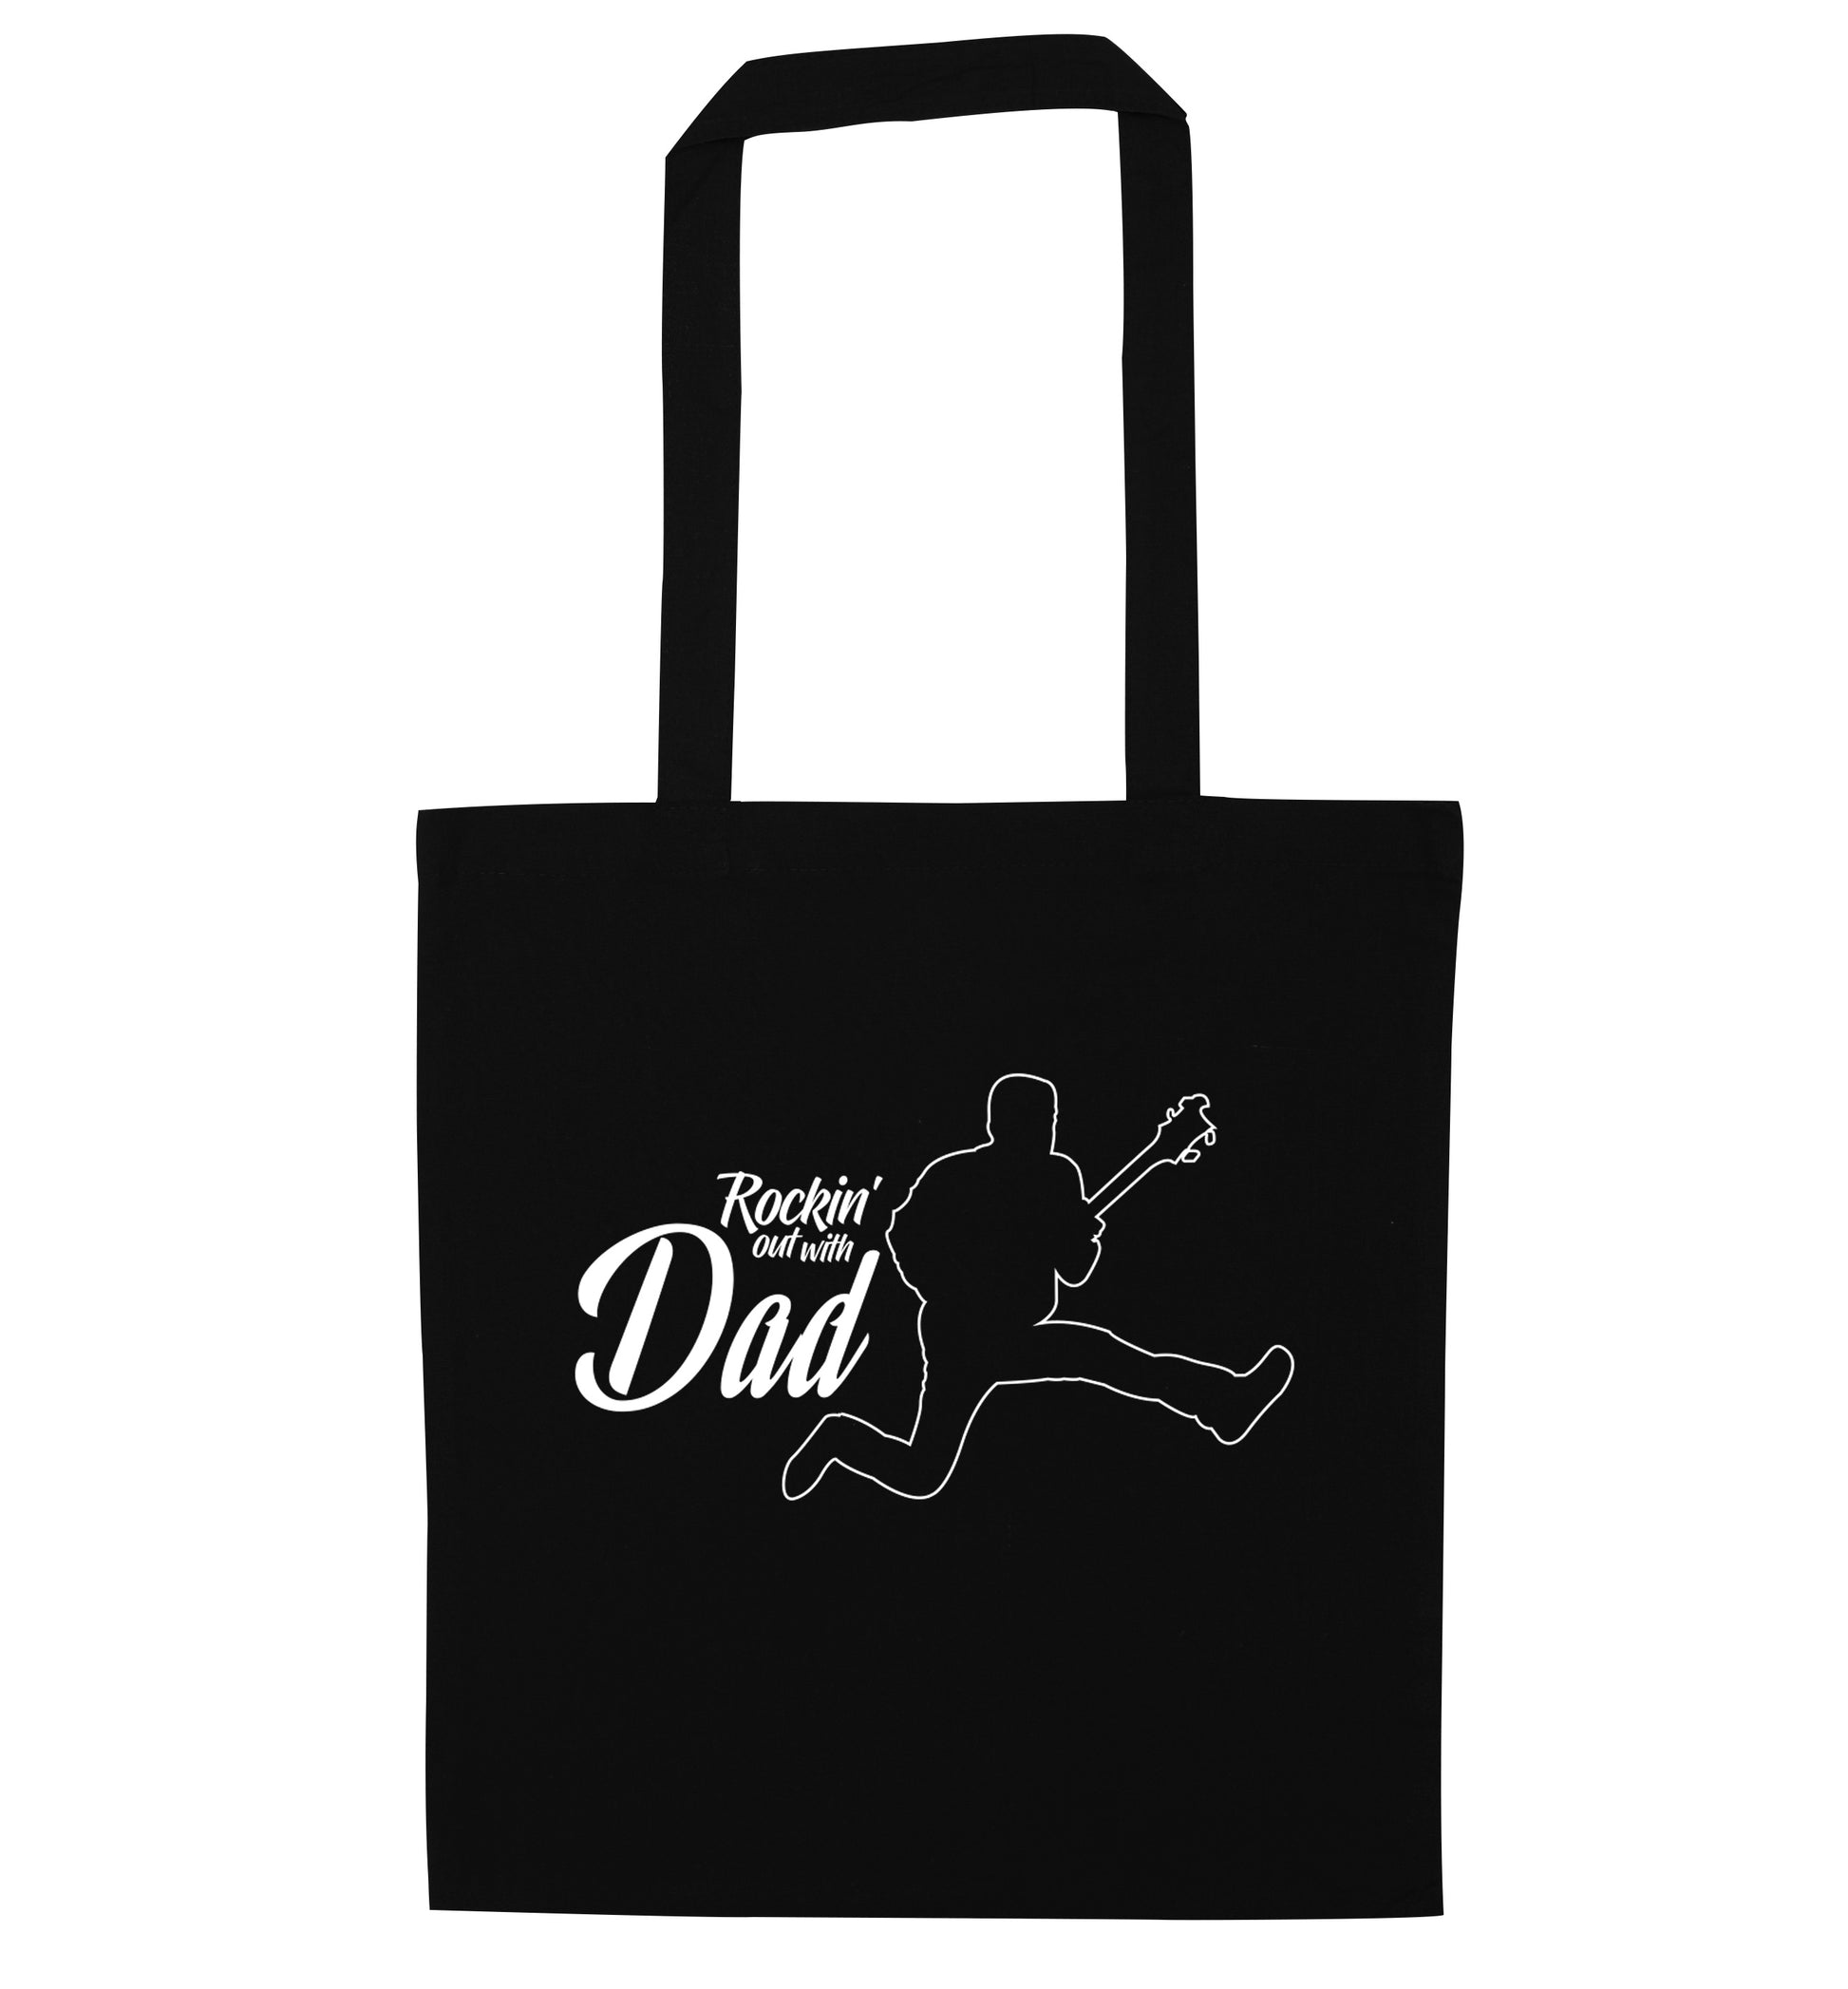 Rockin out with dad black tote bag